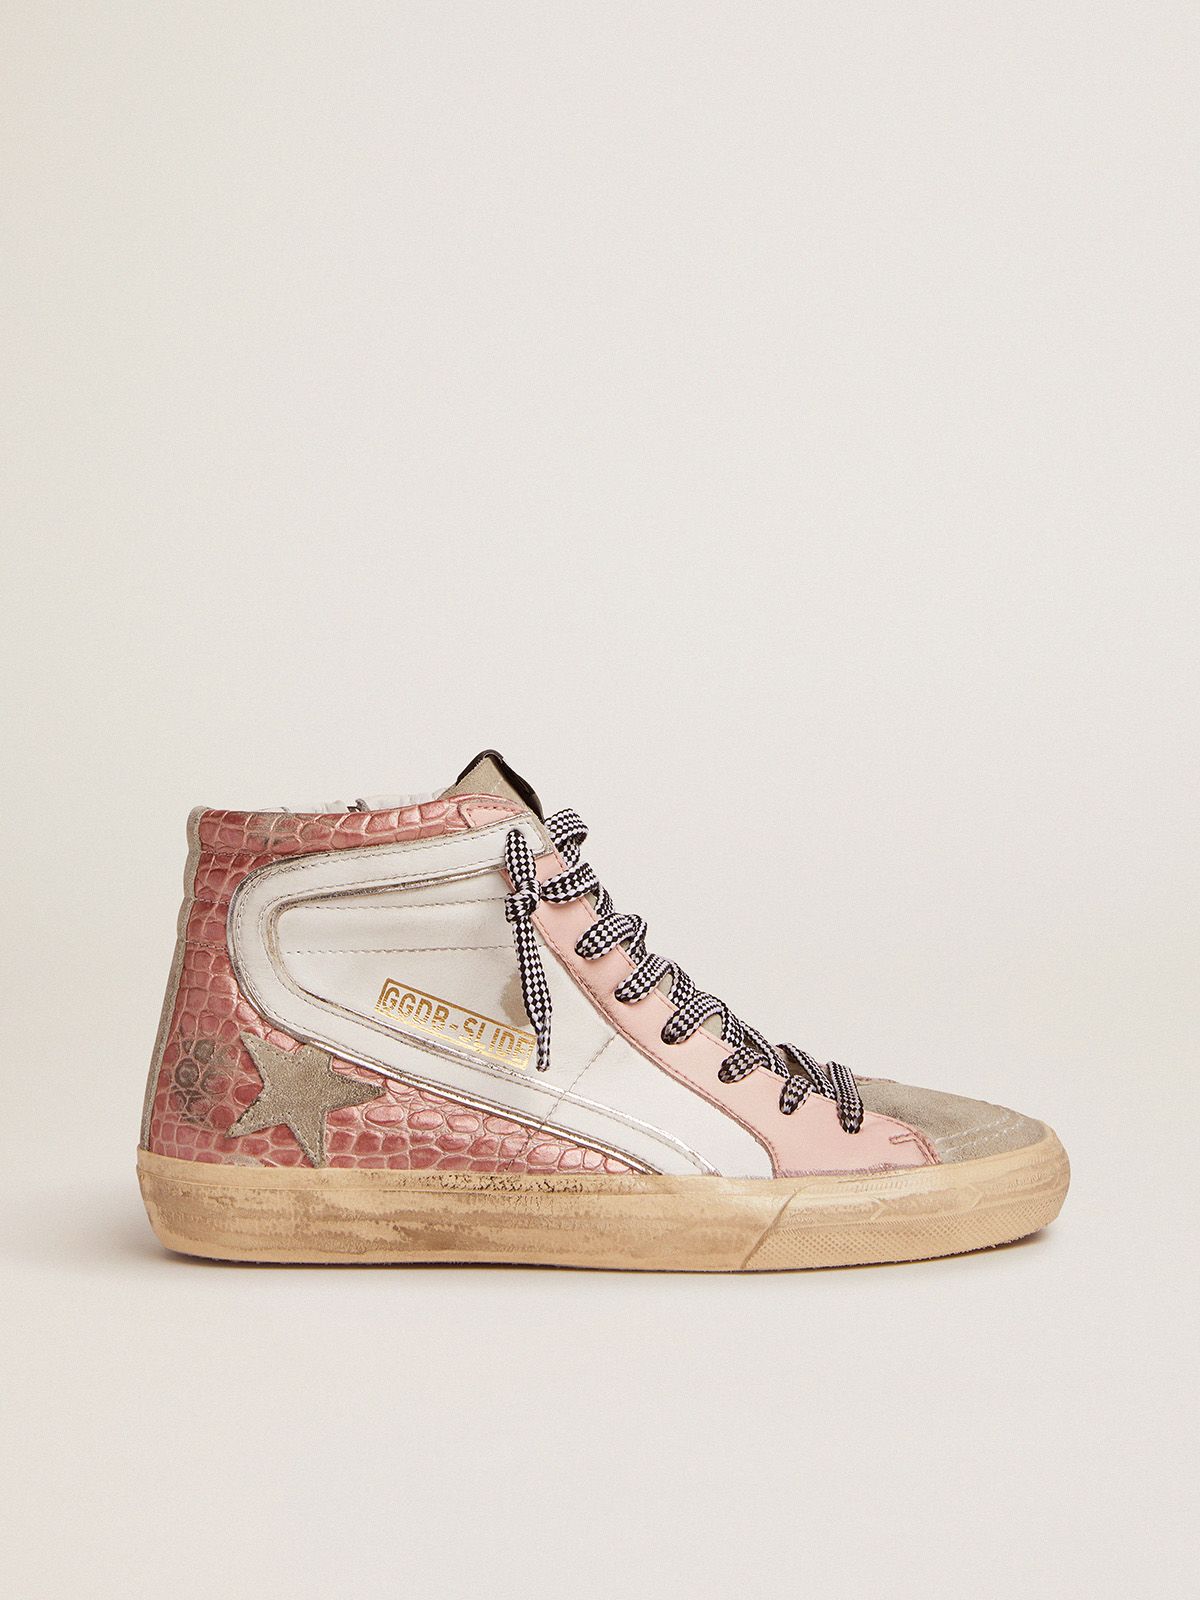 golden goose pink sneakers white and Slide with crocodile-print leather upper